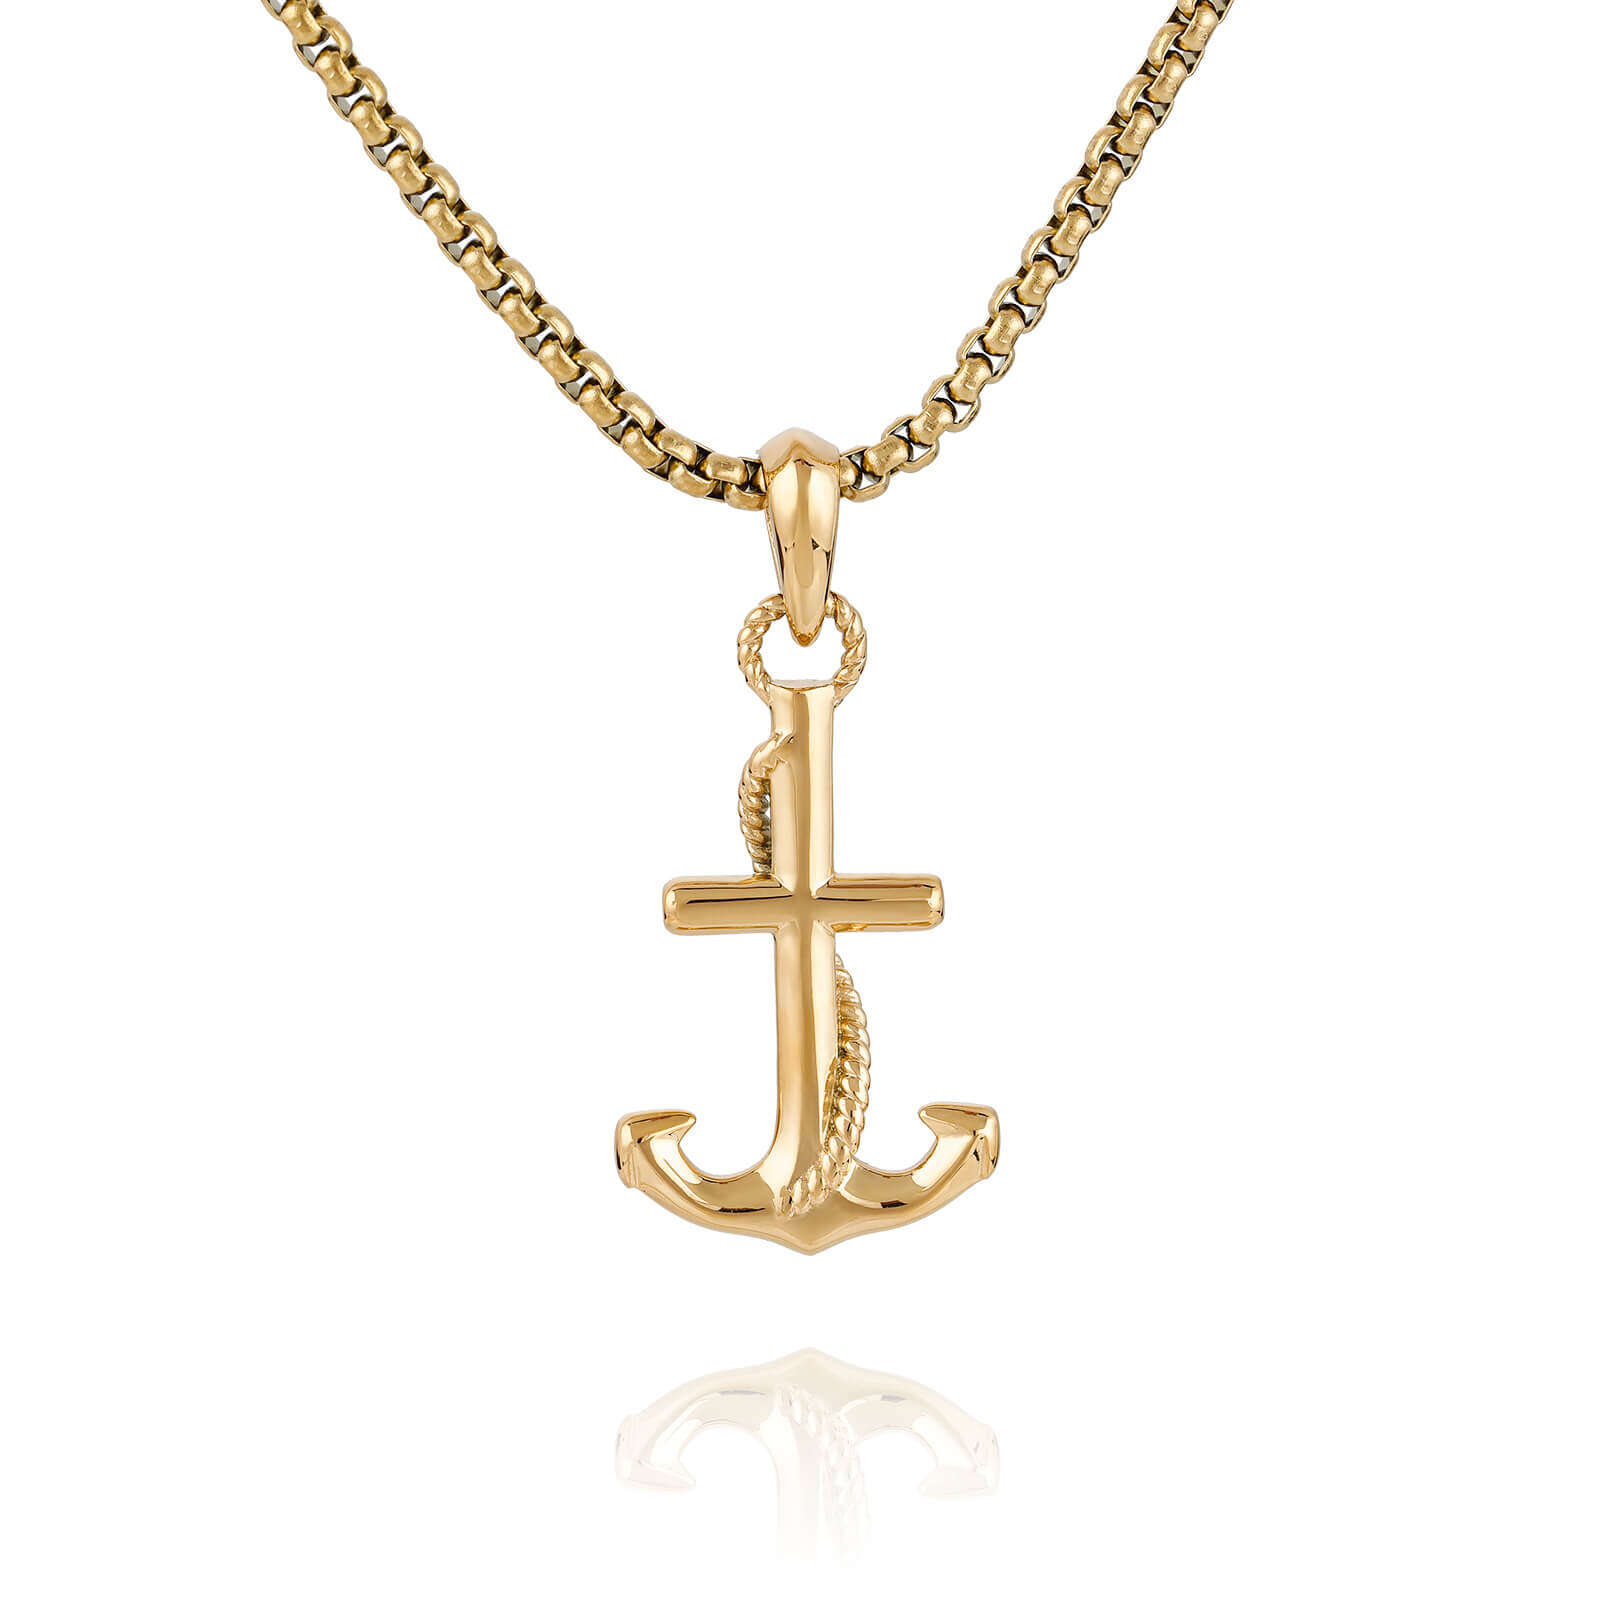 VERENA Custom Men's Stainless Steel Gold Simple Anchor Pendant Charm Necklace